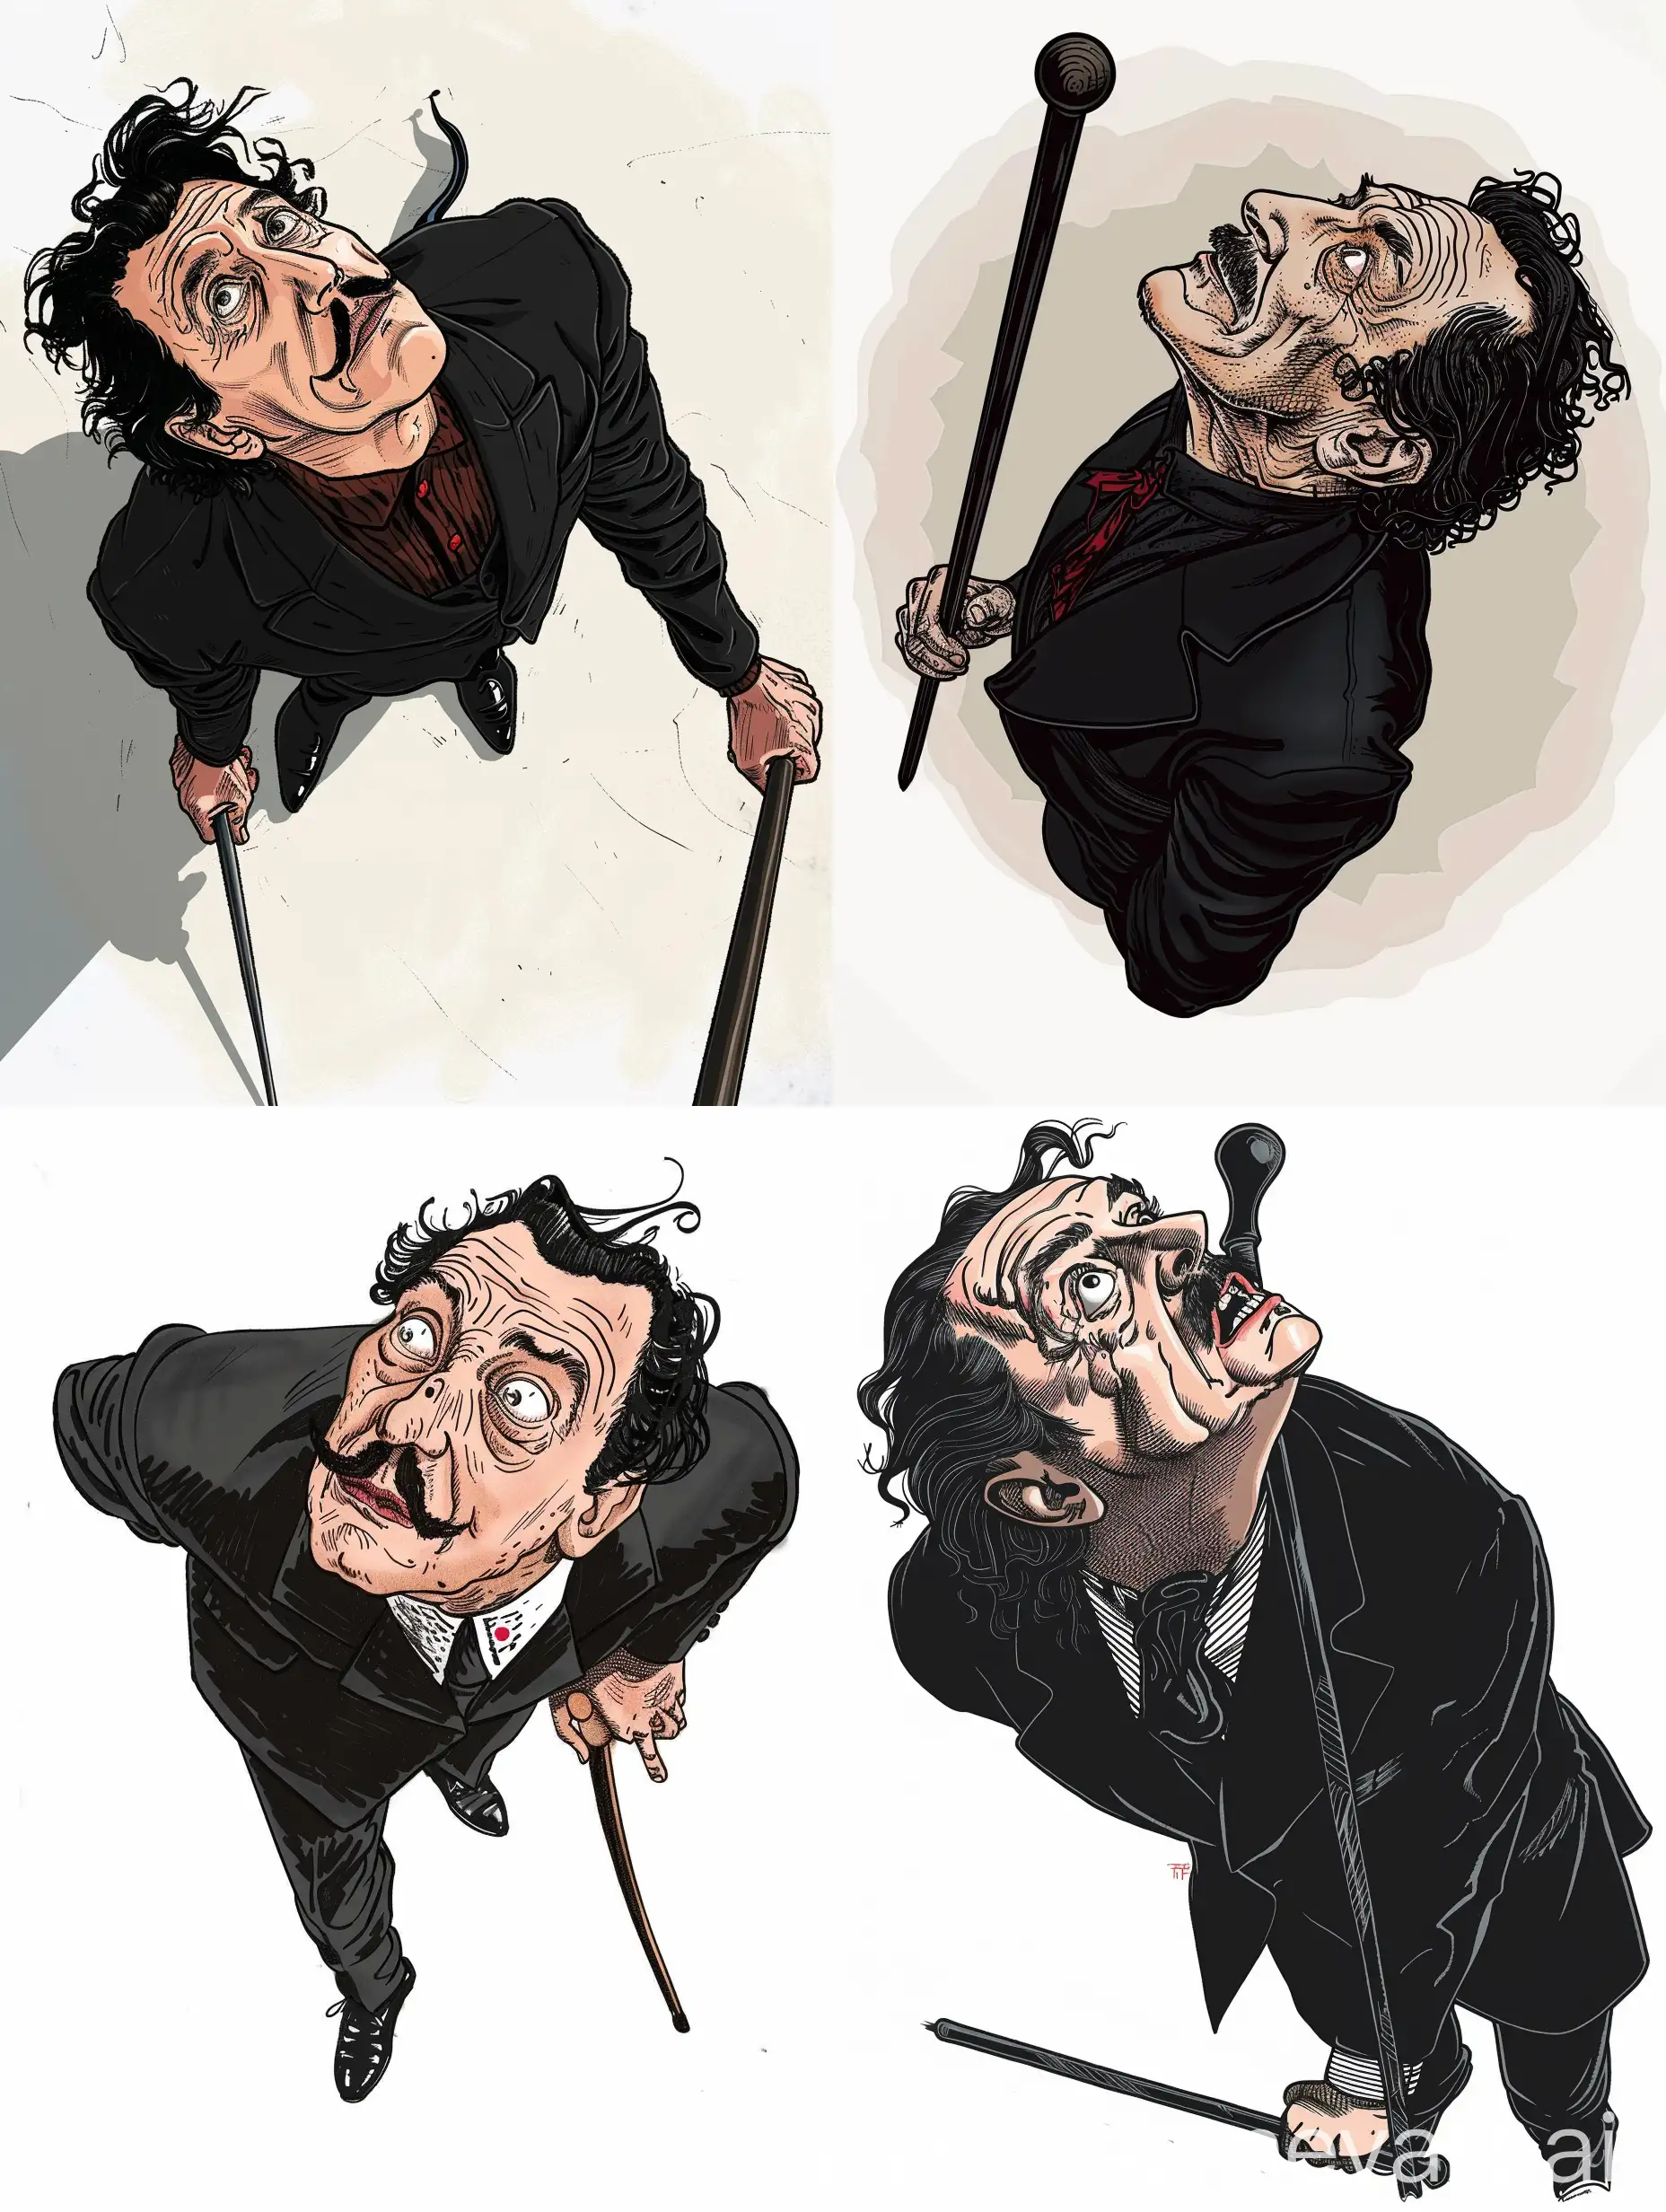 Salvador-Dali-Cartoon-Style-Portrait-with-Black-and-Red-Accents